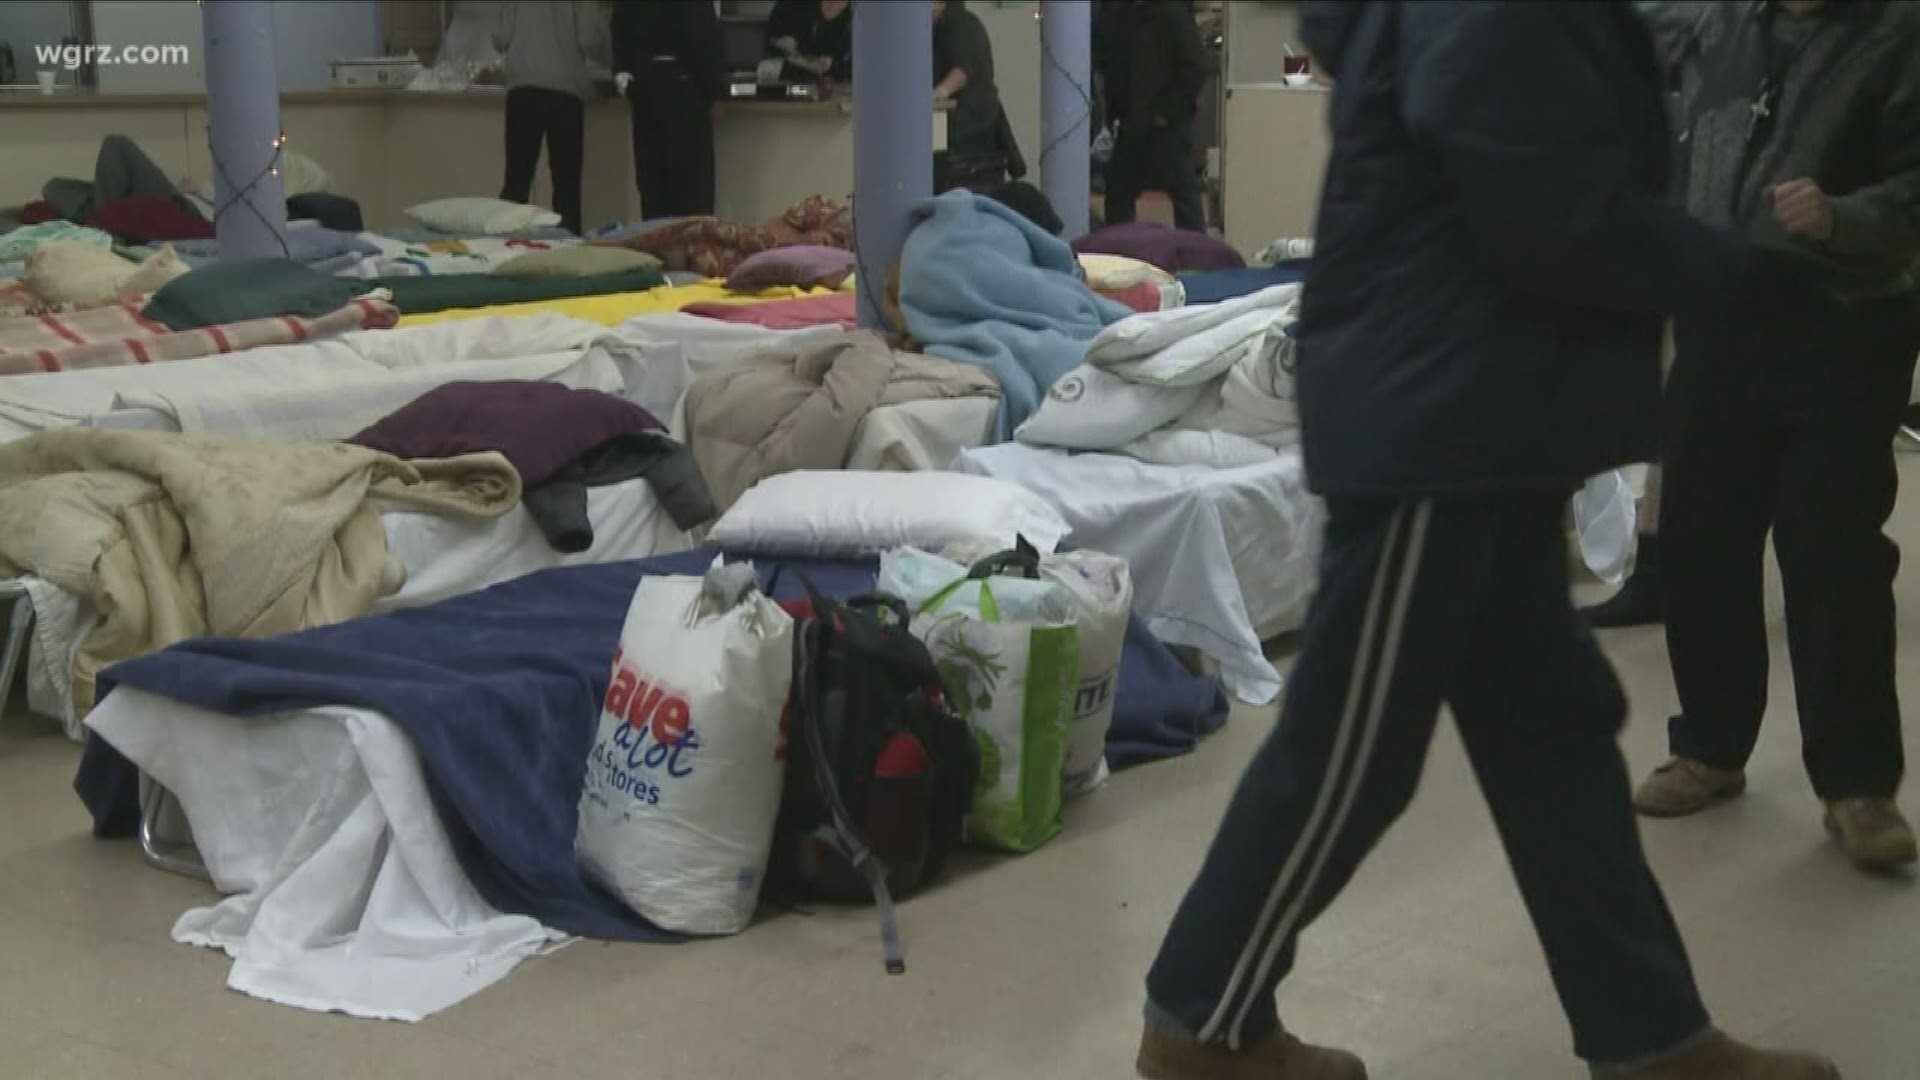 Number of homeless women rises in Buffalo